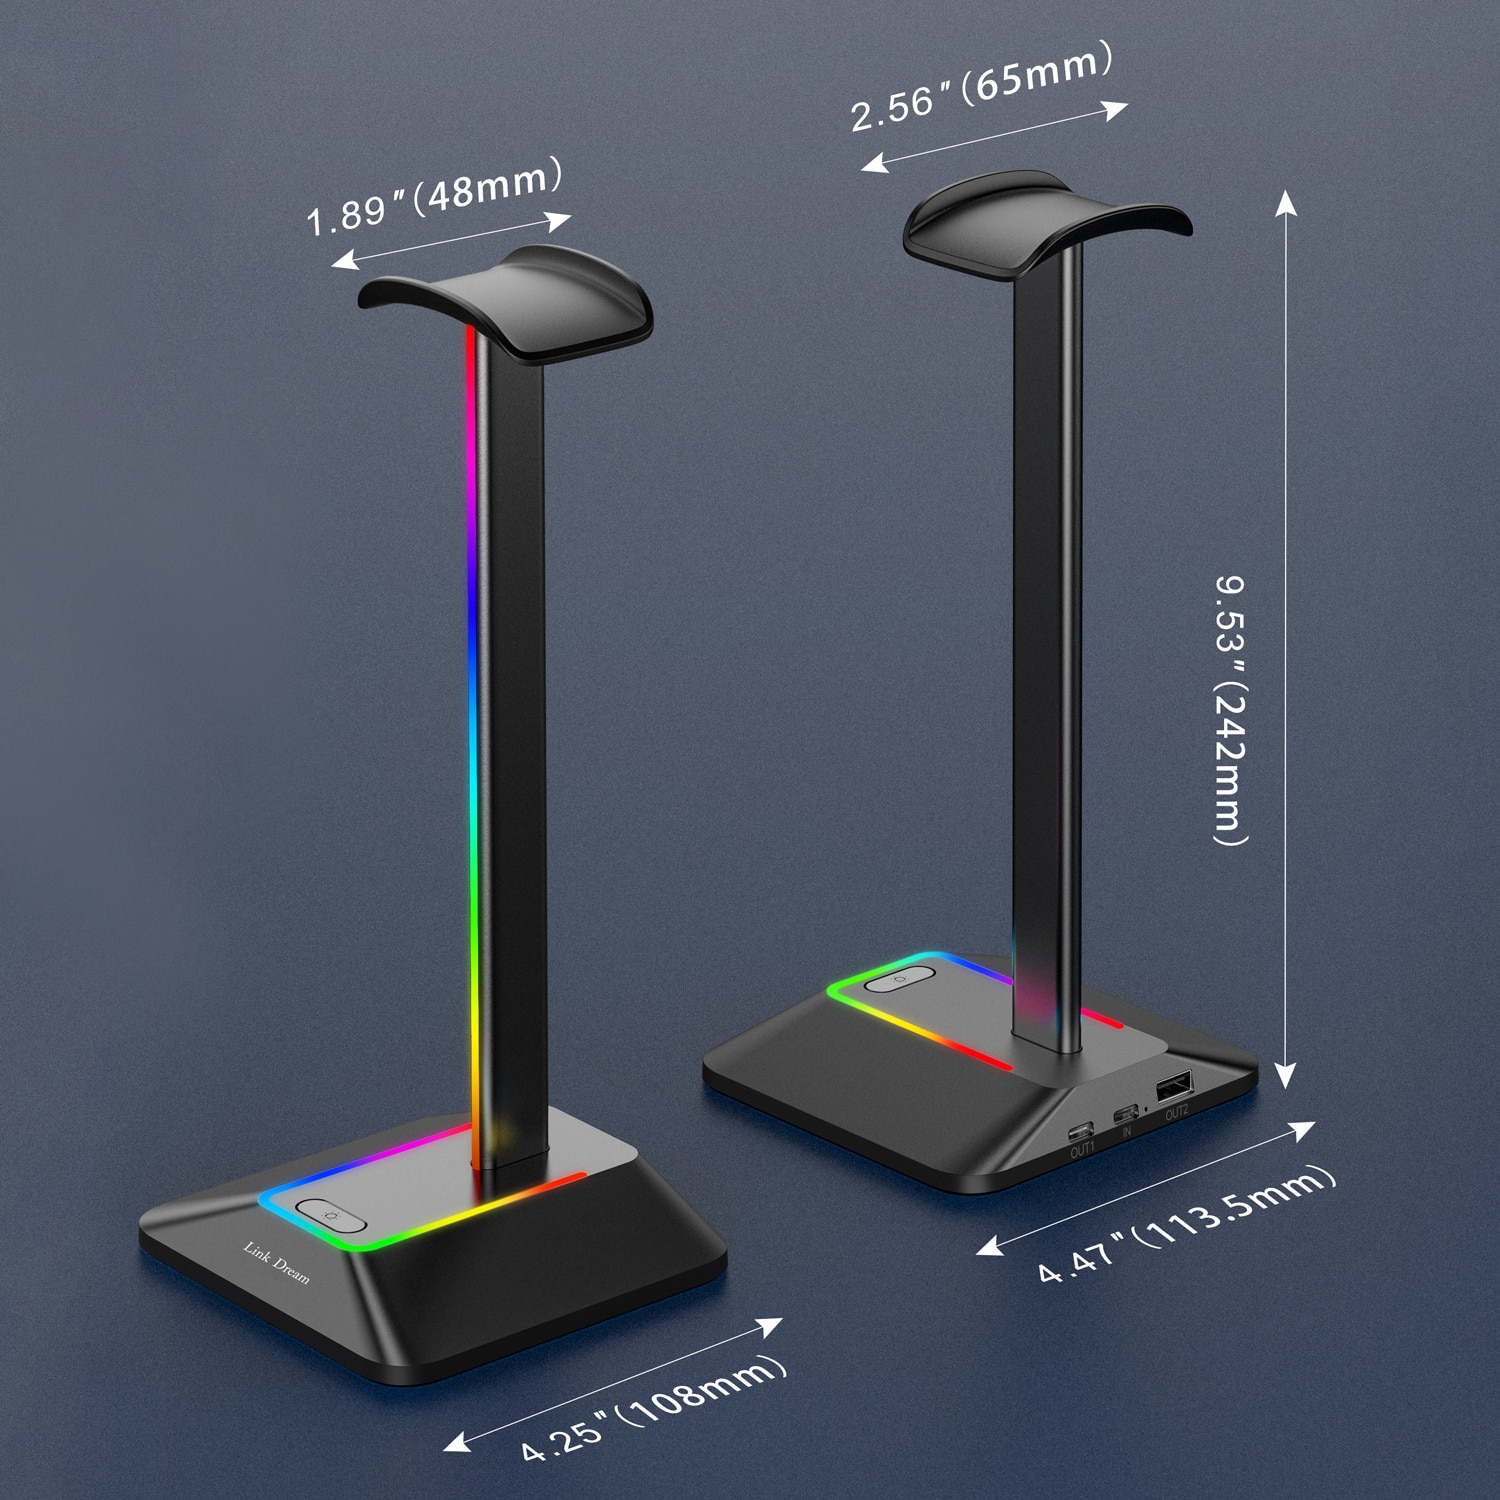 RGB Headphone Stand with USB Ports - Perfect for Gamers!